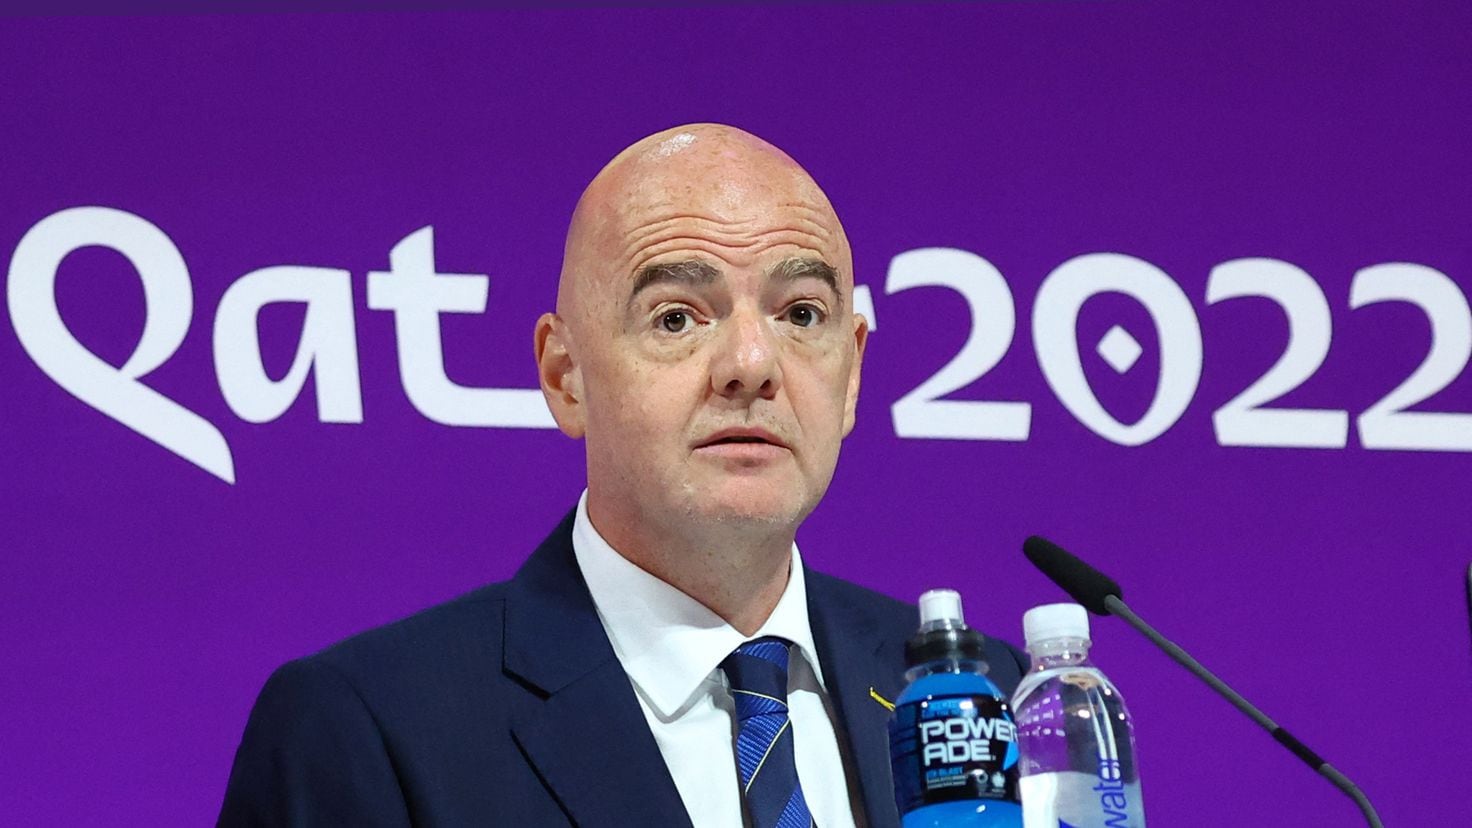 New documents revealed about Qatar bribing FIFA in order to host the 2022 World Cup